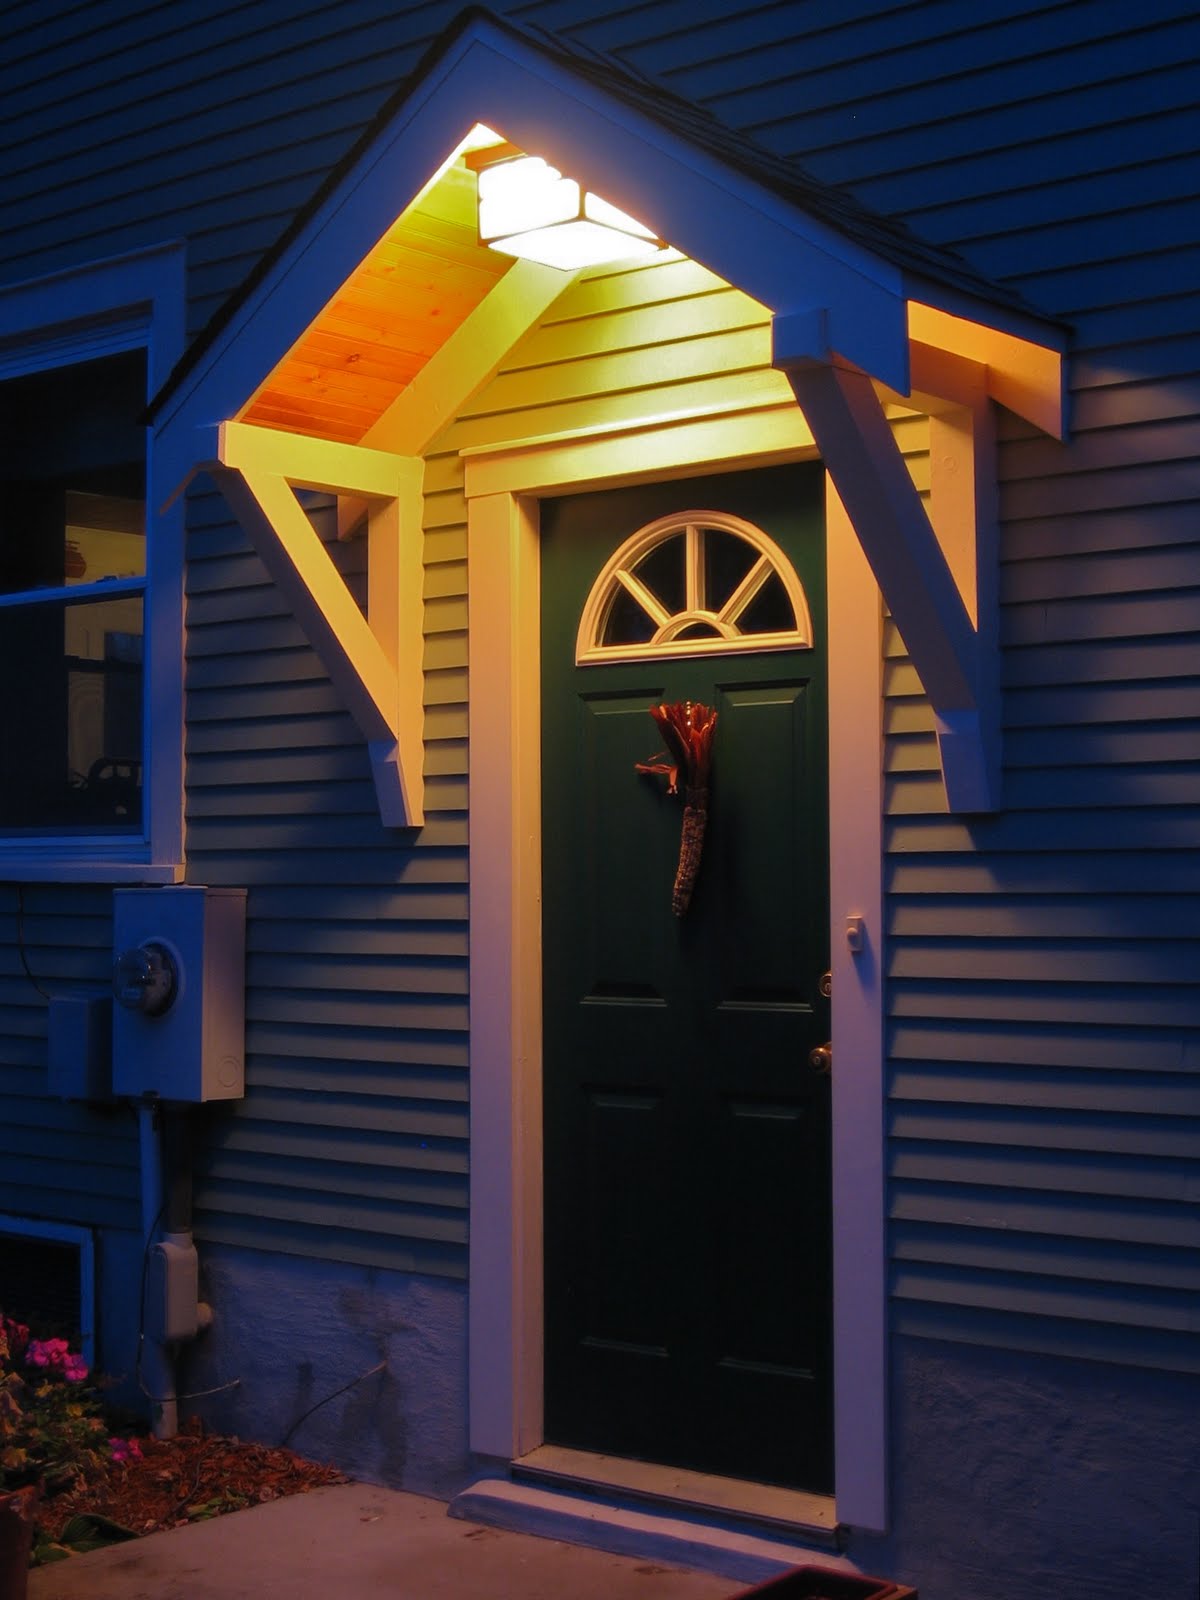 How To Build A Small Portico Above A Door - Part - The